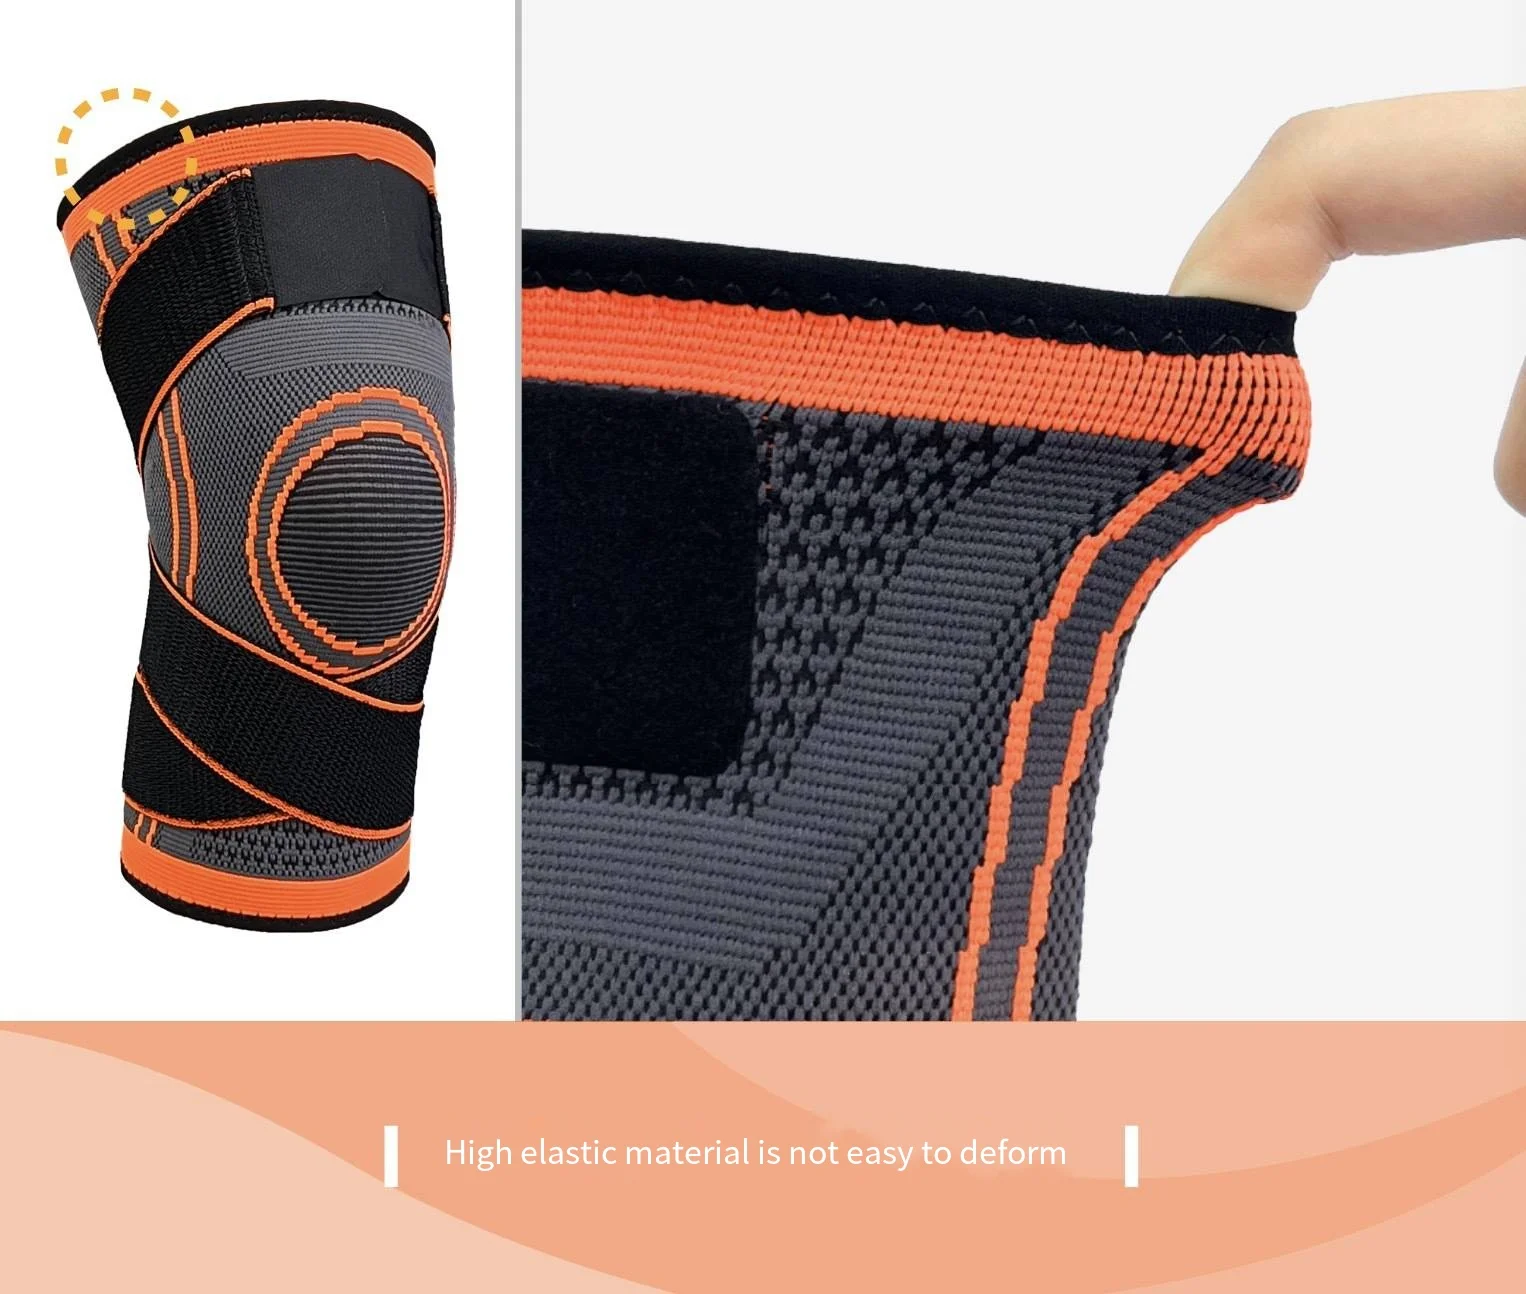 Factory Price Knee Sleeve Compression Fit Support for Joint Pain and Arthritis Relief Improved Circulation Compression Single